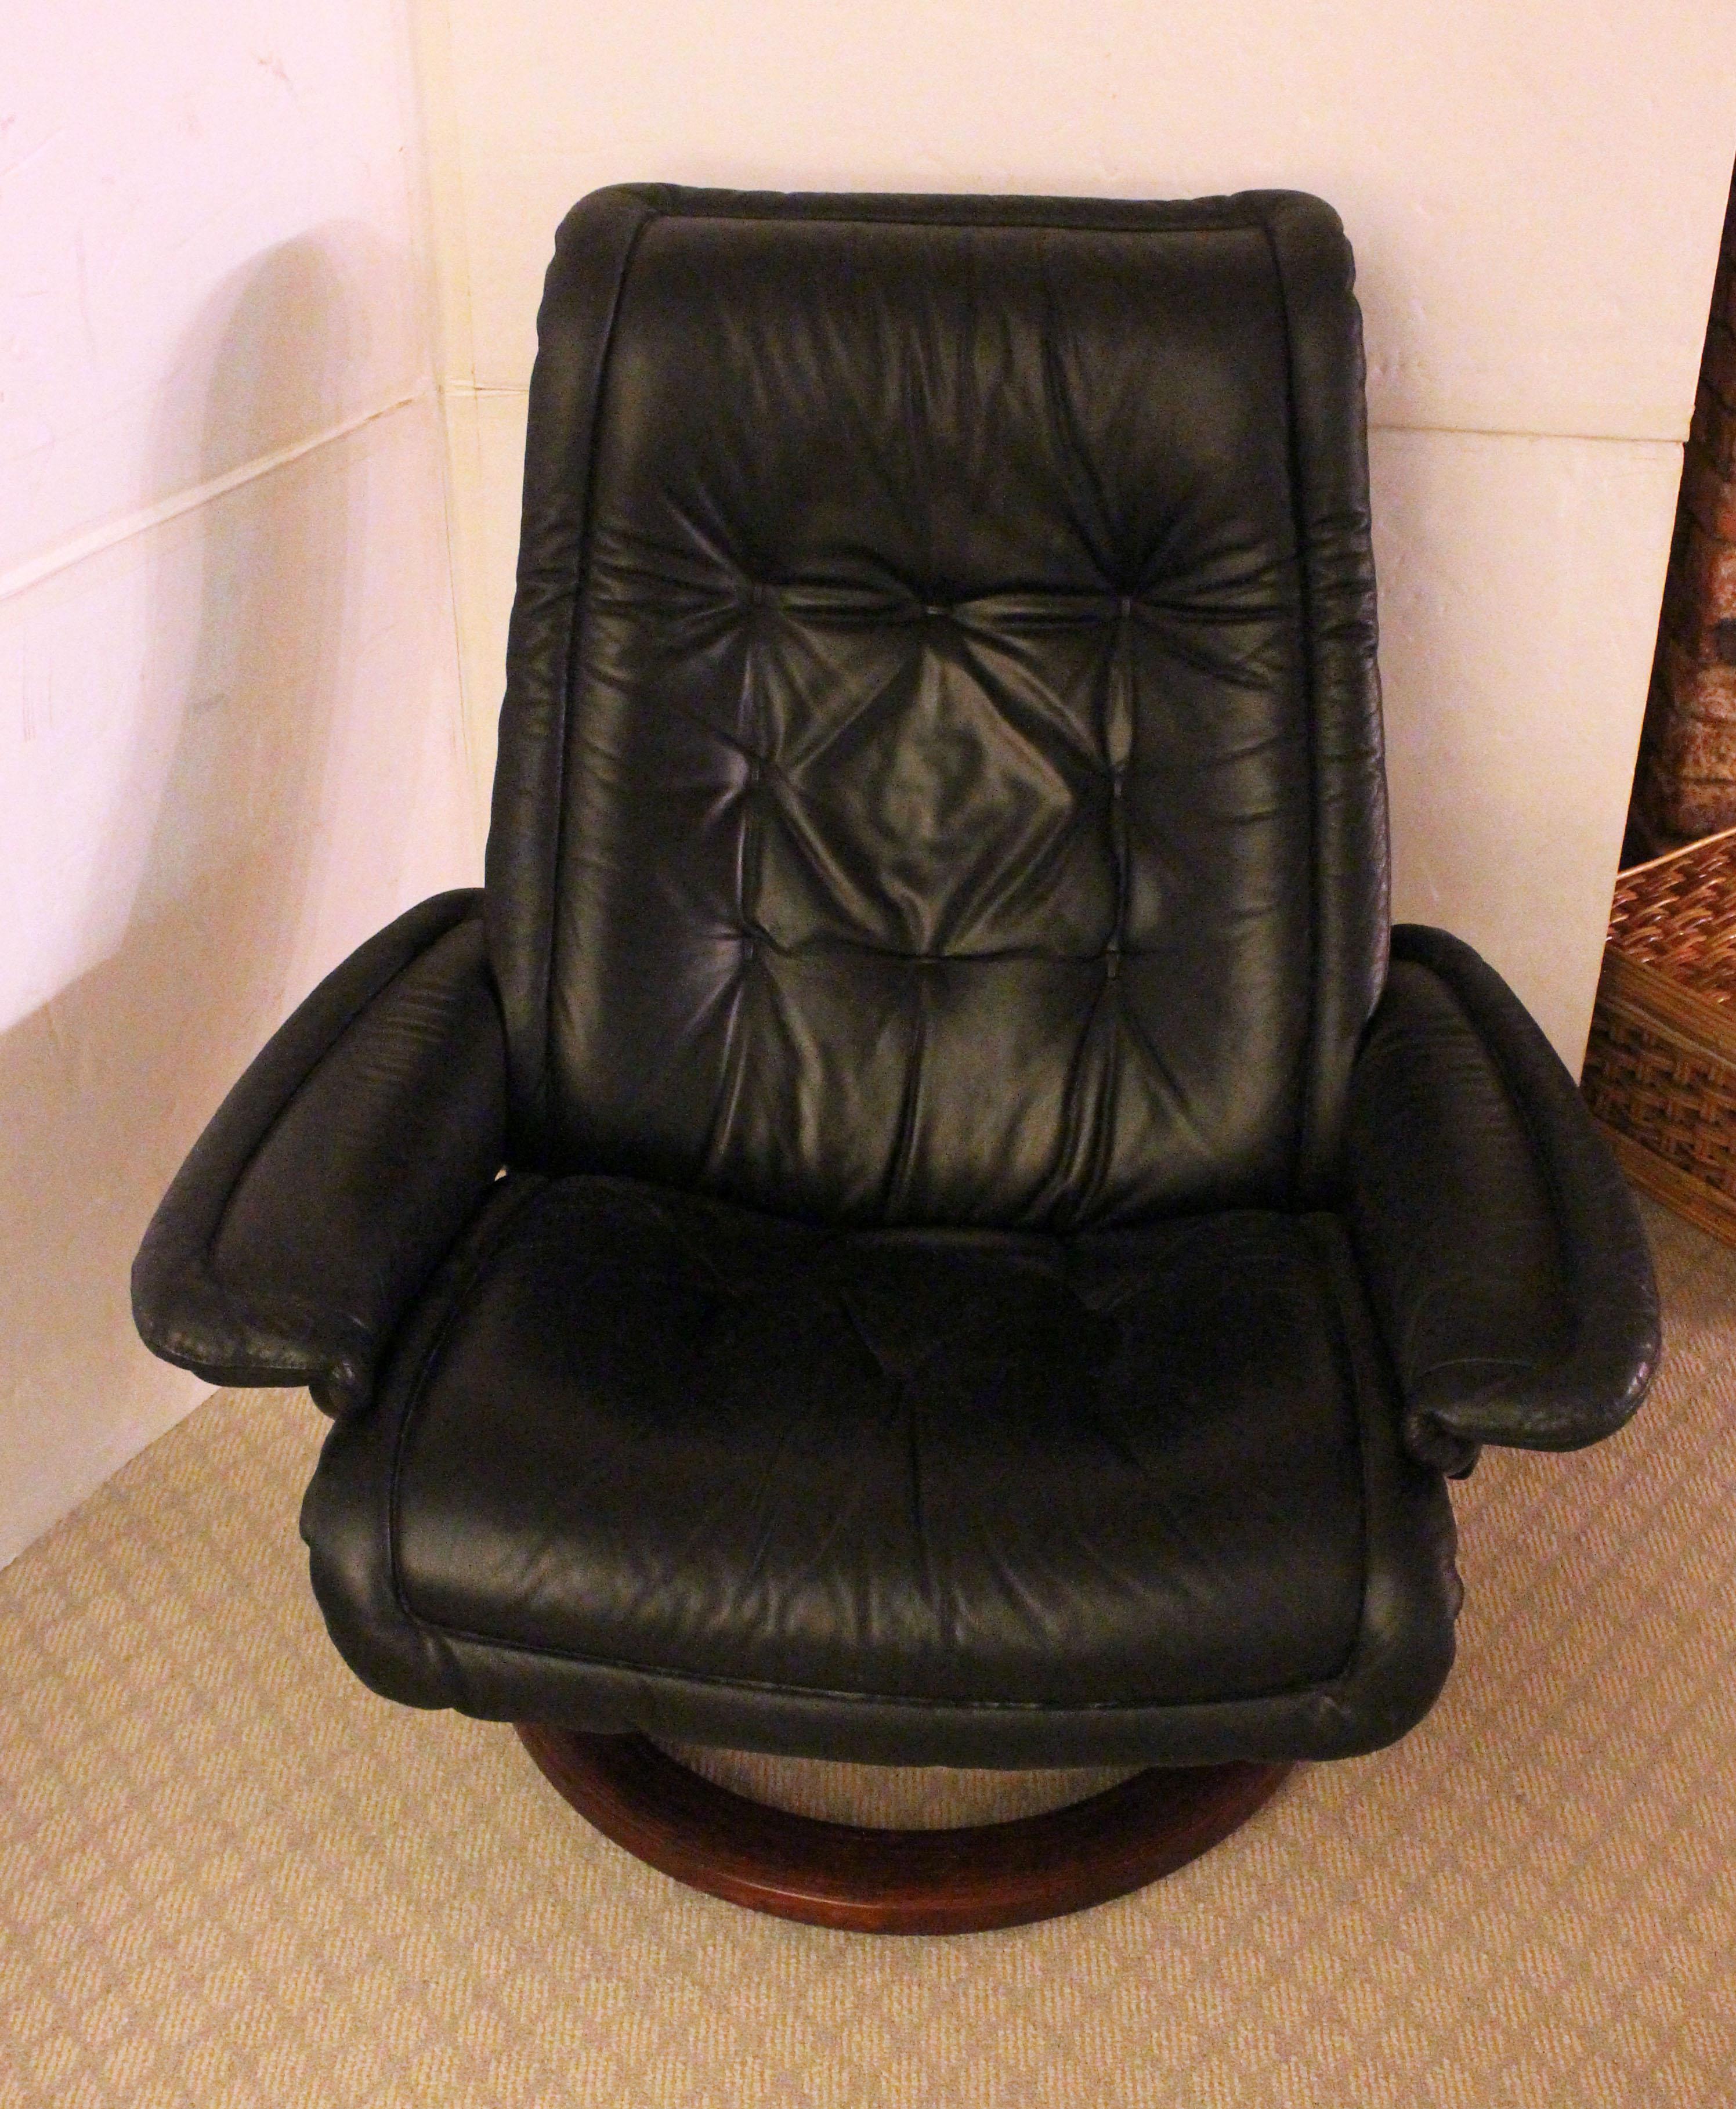 Vintage glove leather black Ekornes Stressless Reclining Chair and Ottoman. Signed on mechanism. From a great mid century modern home in Chapel Hill, NC. Very good condition.
Chair: 35